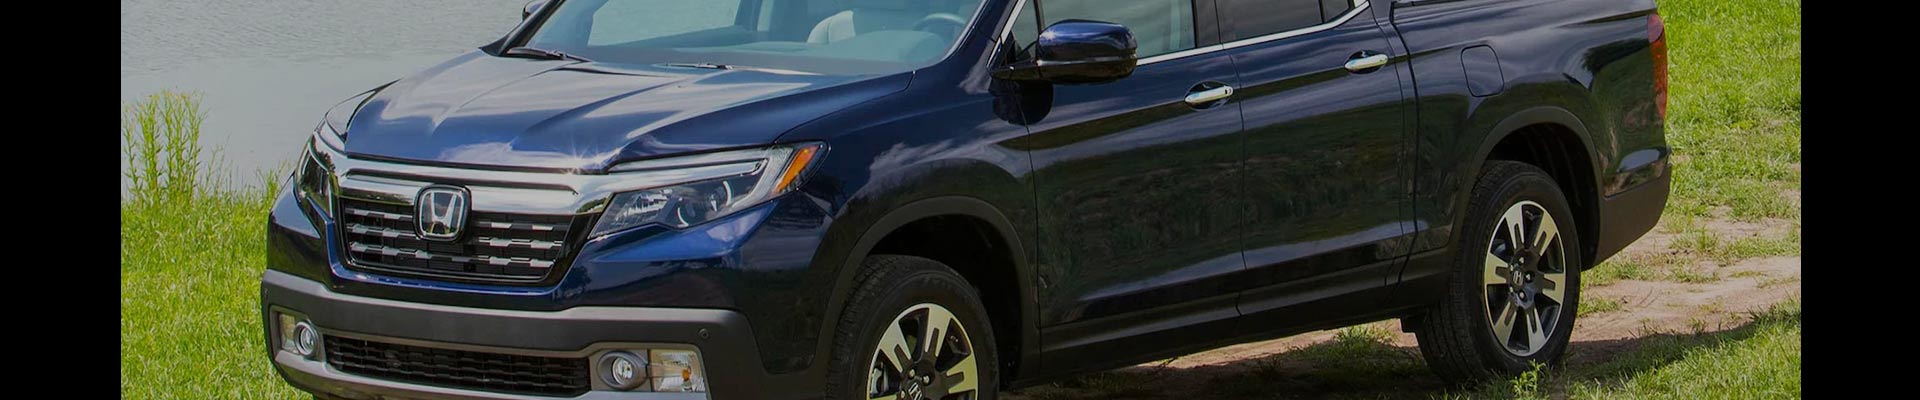 Shop Replacement and OEM 2018 Honda Ridgeline Parts with Discounted Price on the Net